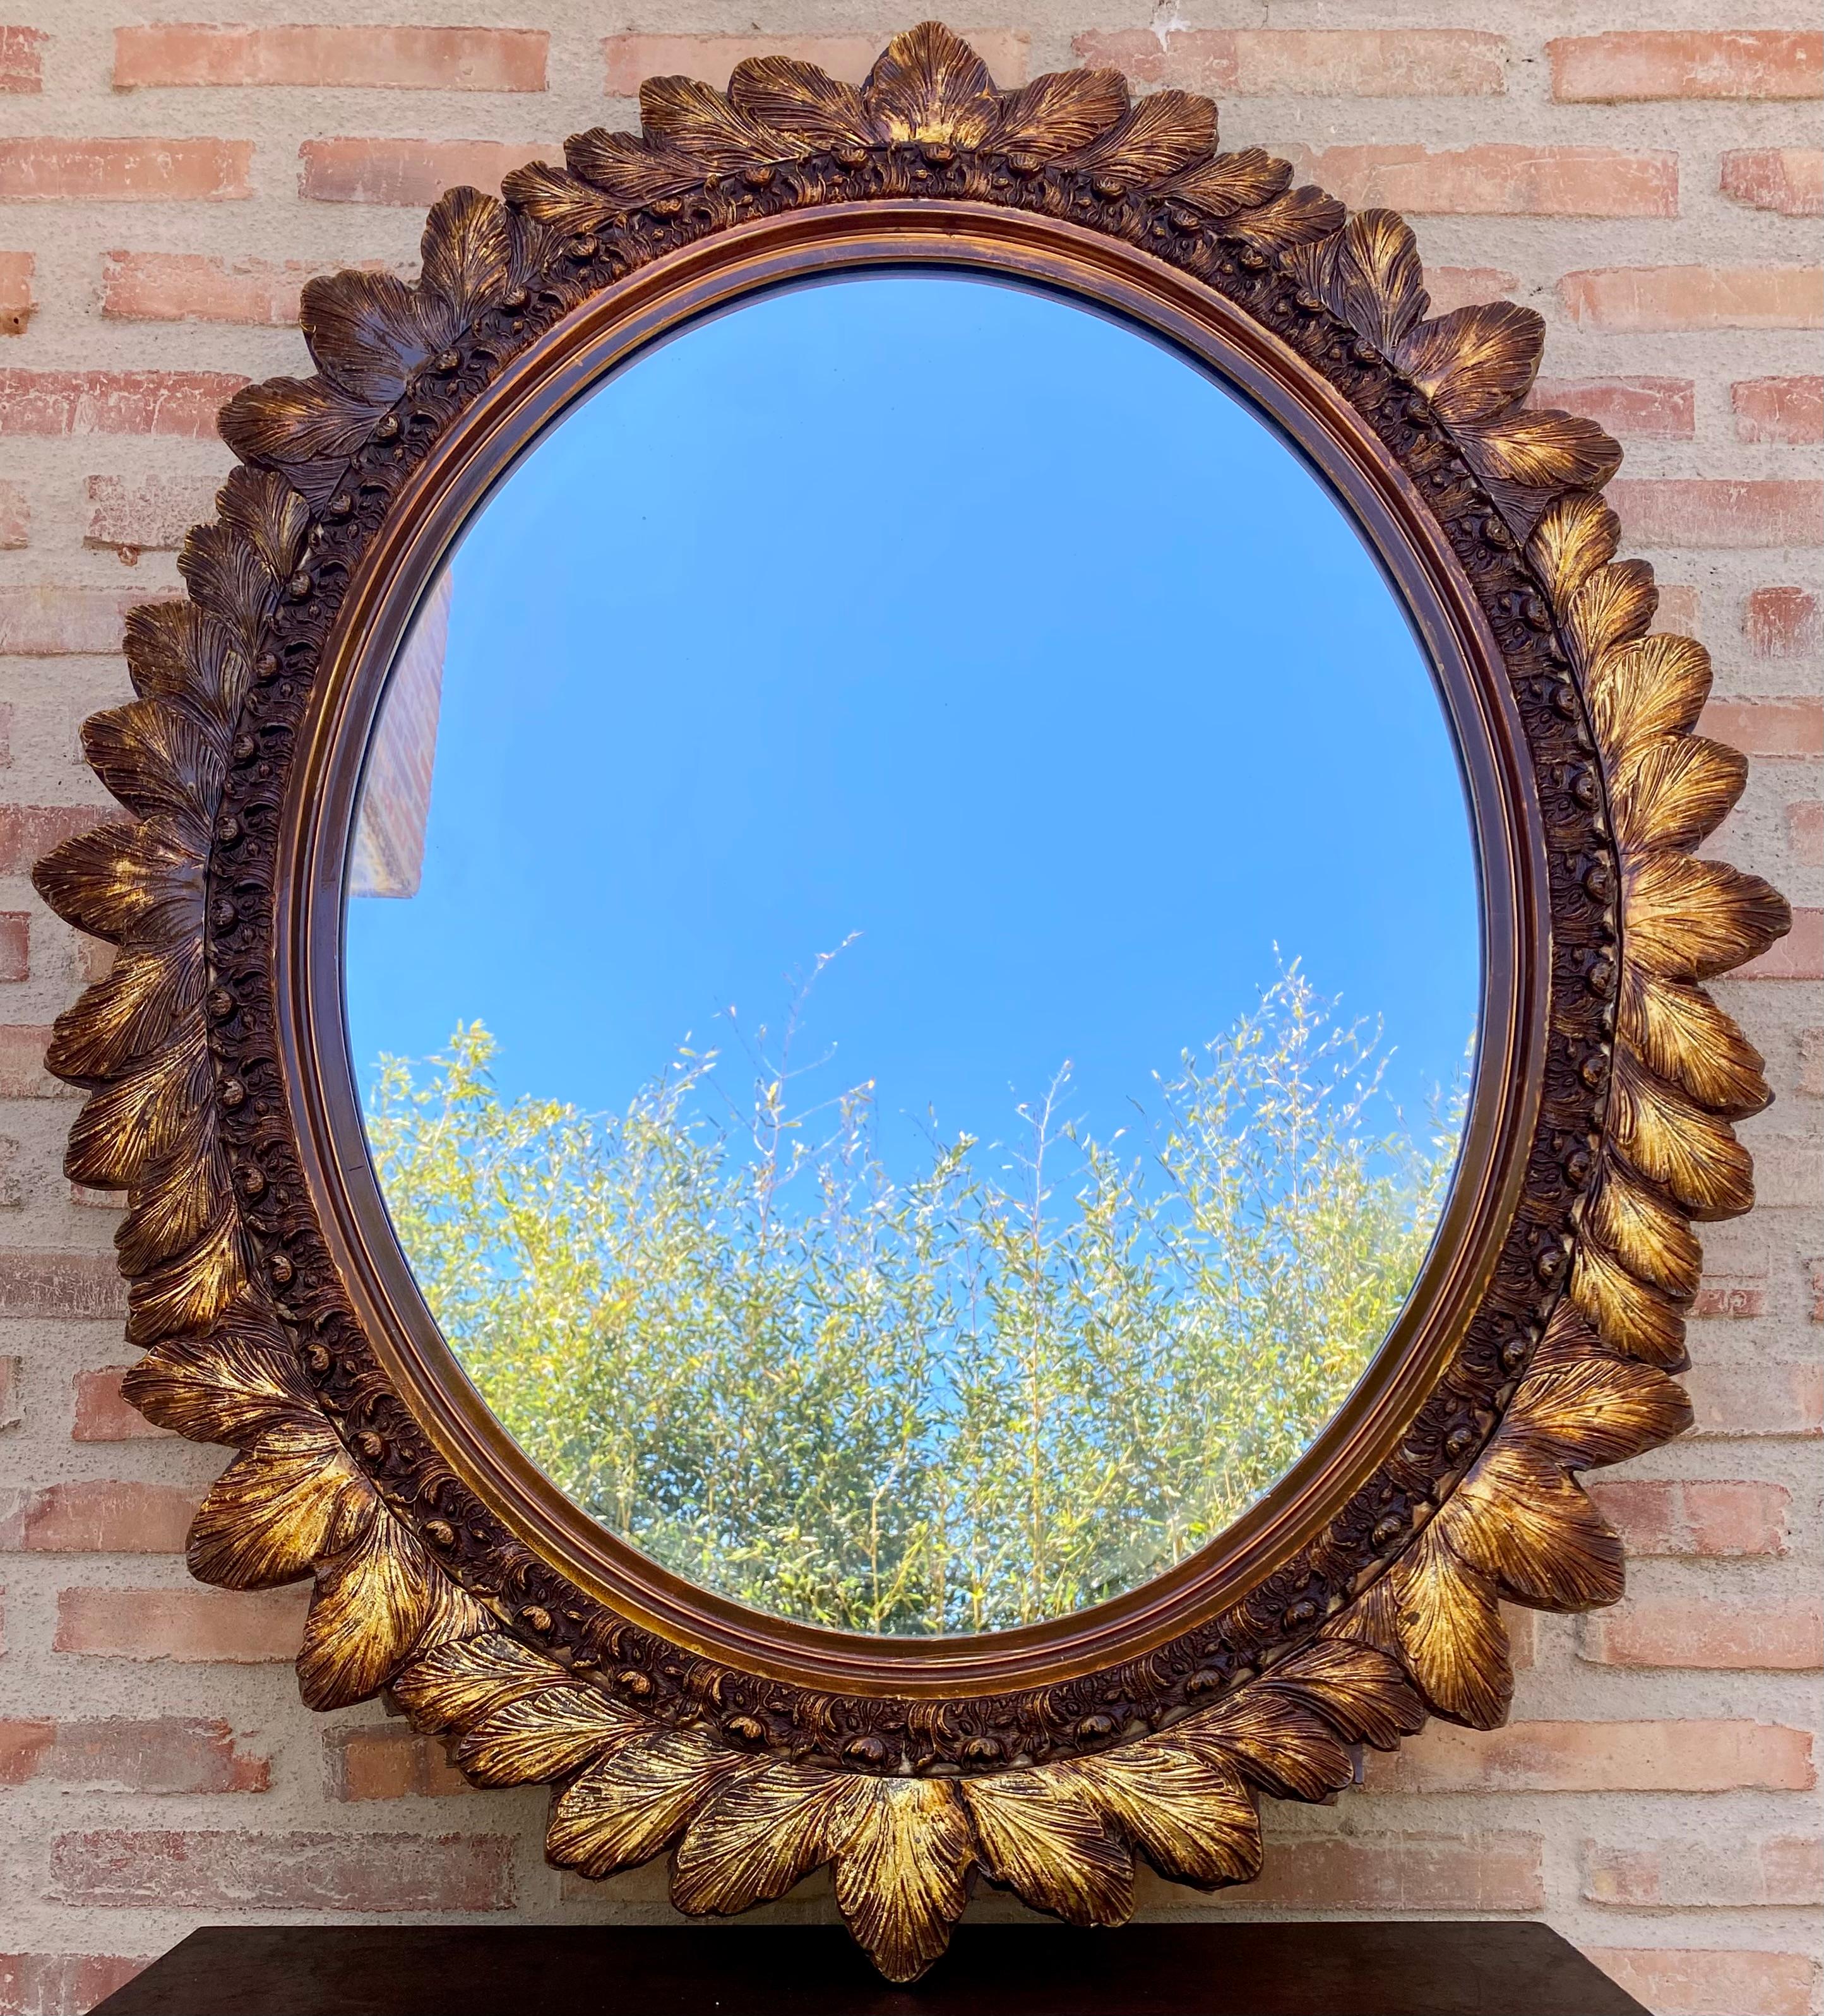 A beautiful large oval mirror in a gold decorative frame with flowers from France. The frame is made of wood. The mirror is in very good vintage condition with no damage or cracks to the frame. Original glass. Truly unique piece for every interior!